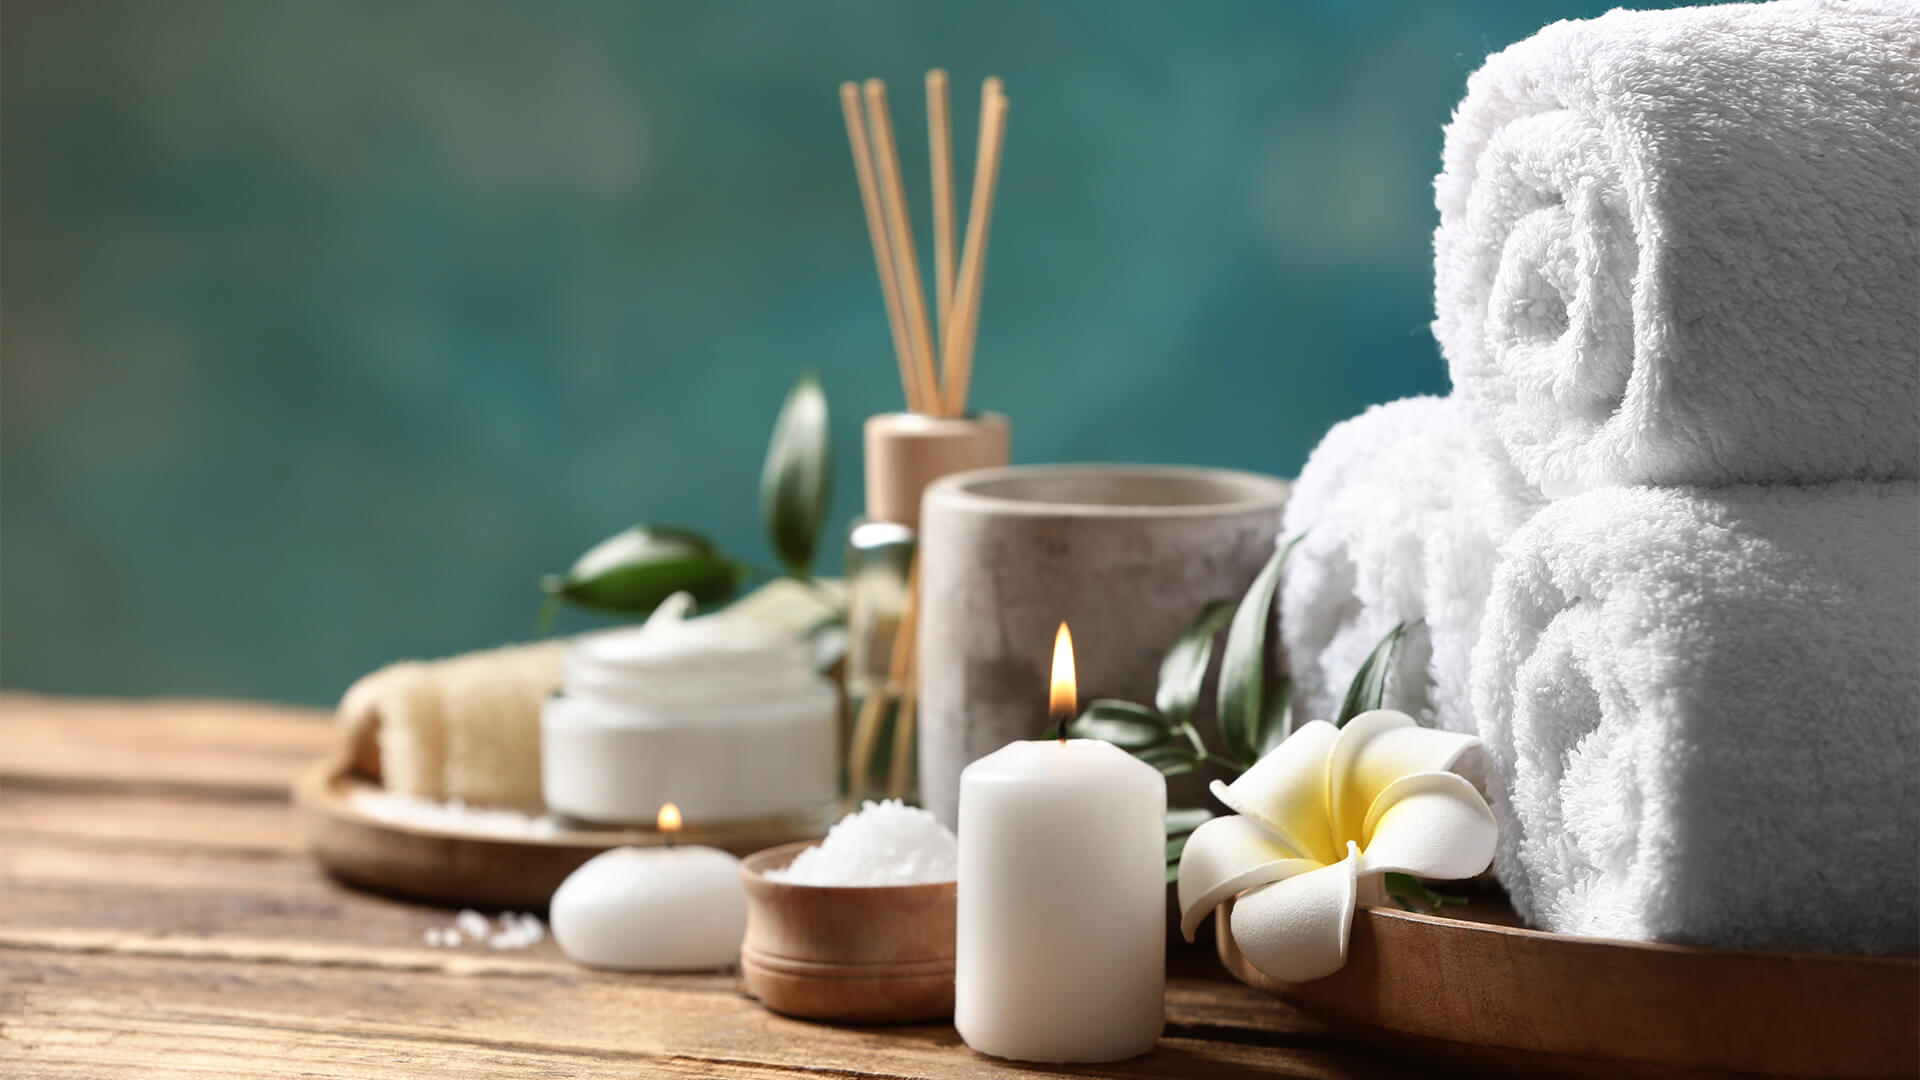 Rolled towels with fragrance sticks, candles, flowers on a wooden tray